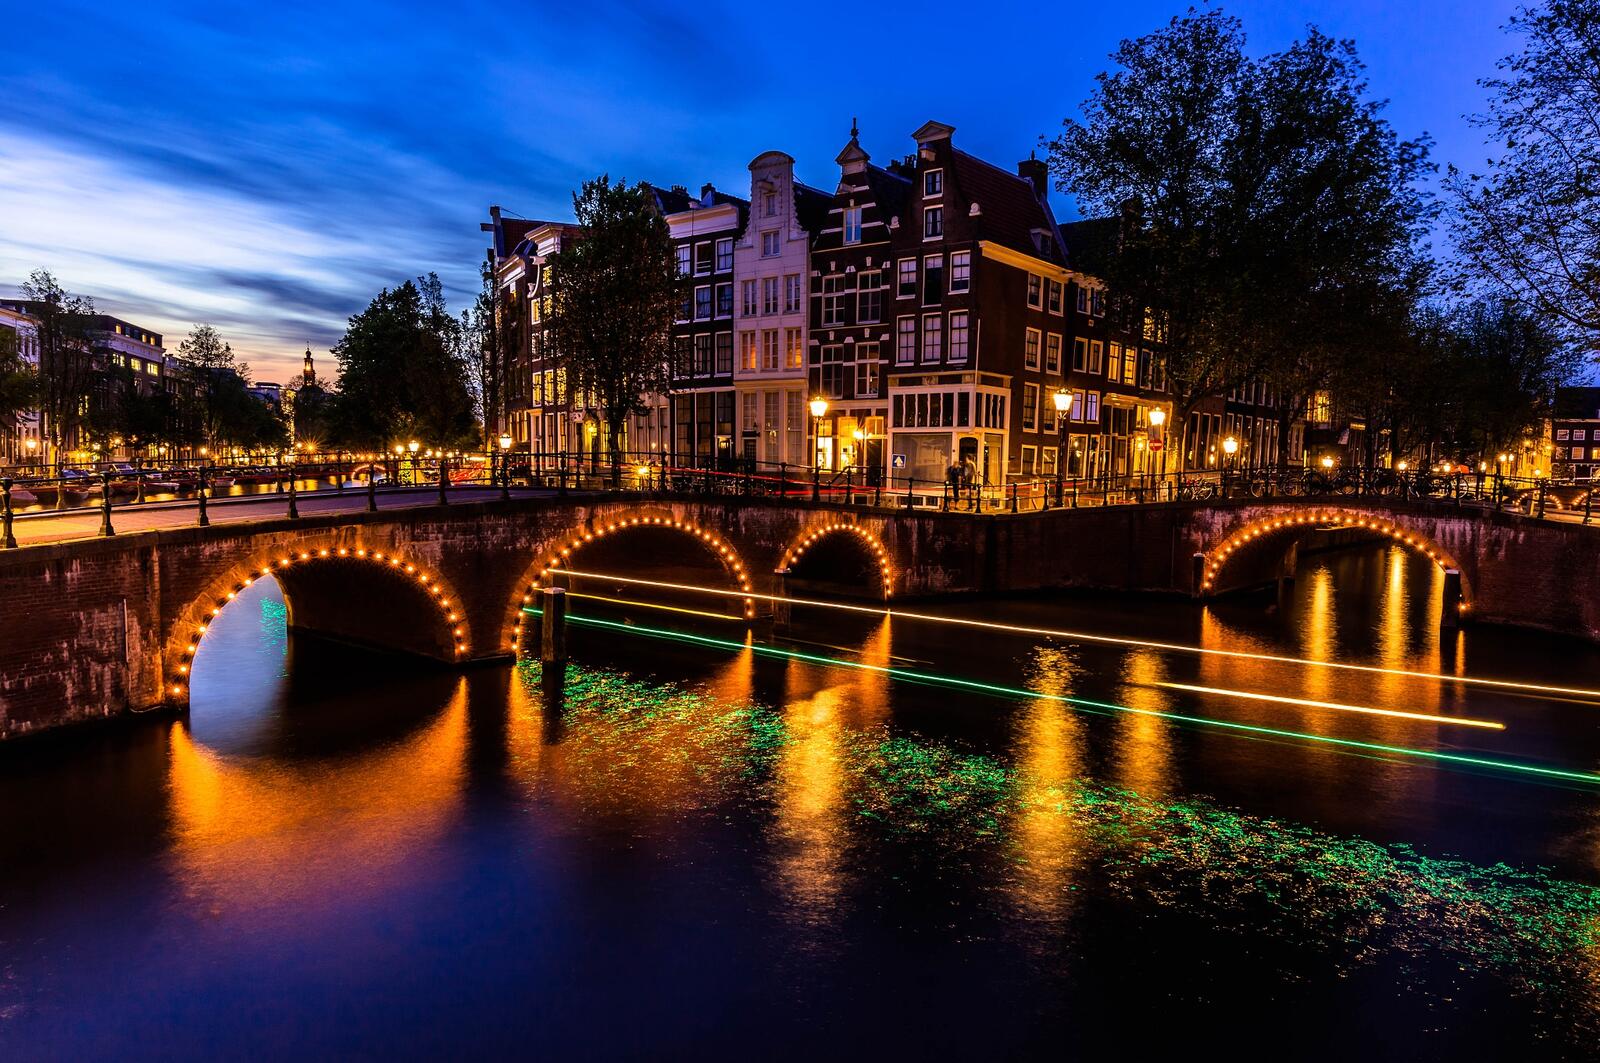 Wallpapers Amsterdam Canal View at Night Netherlands on the desktop